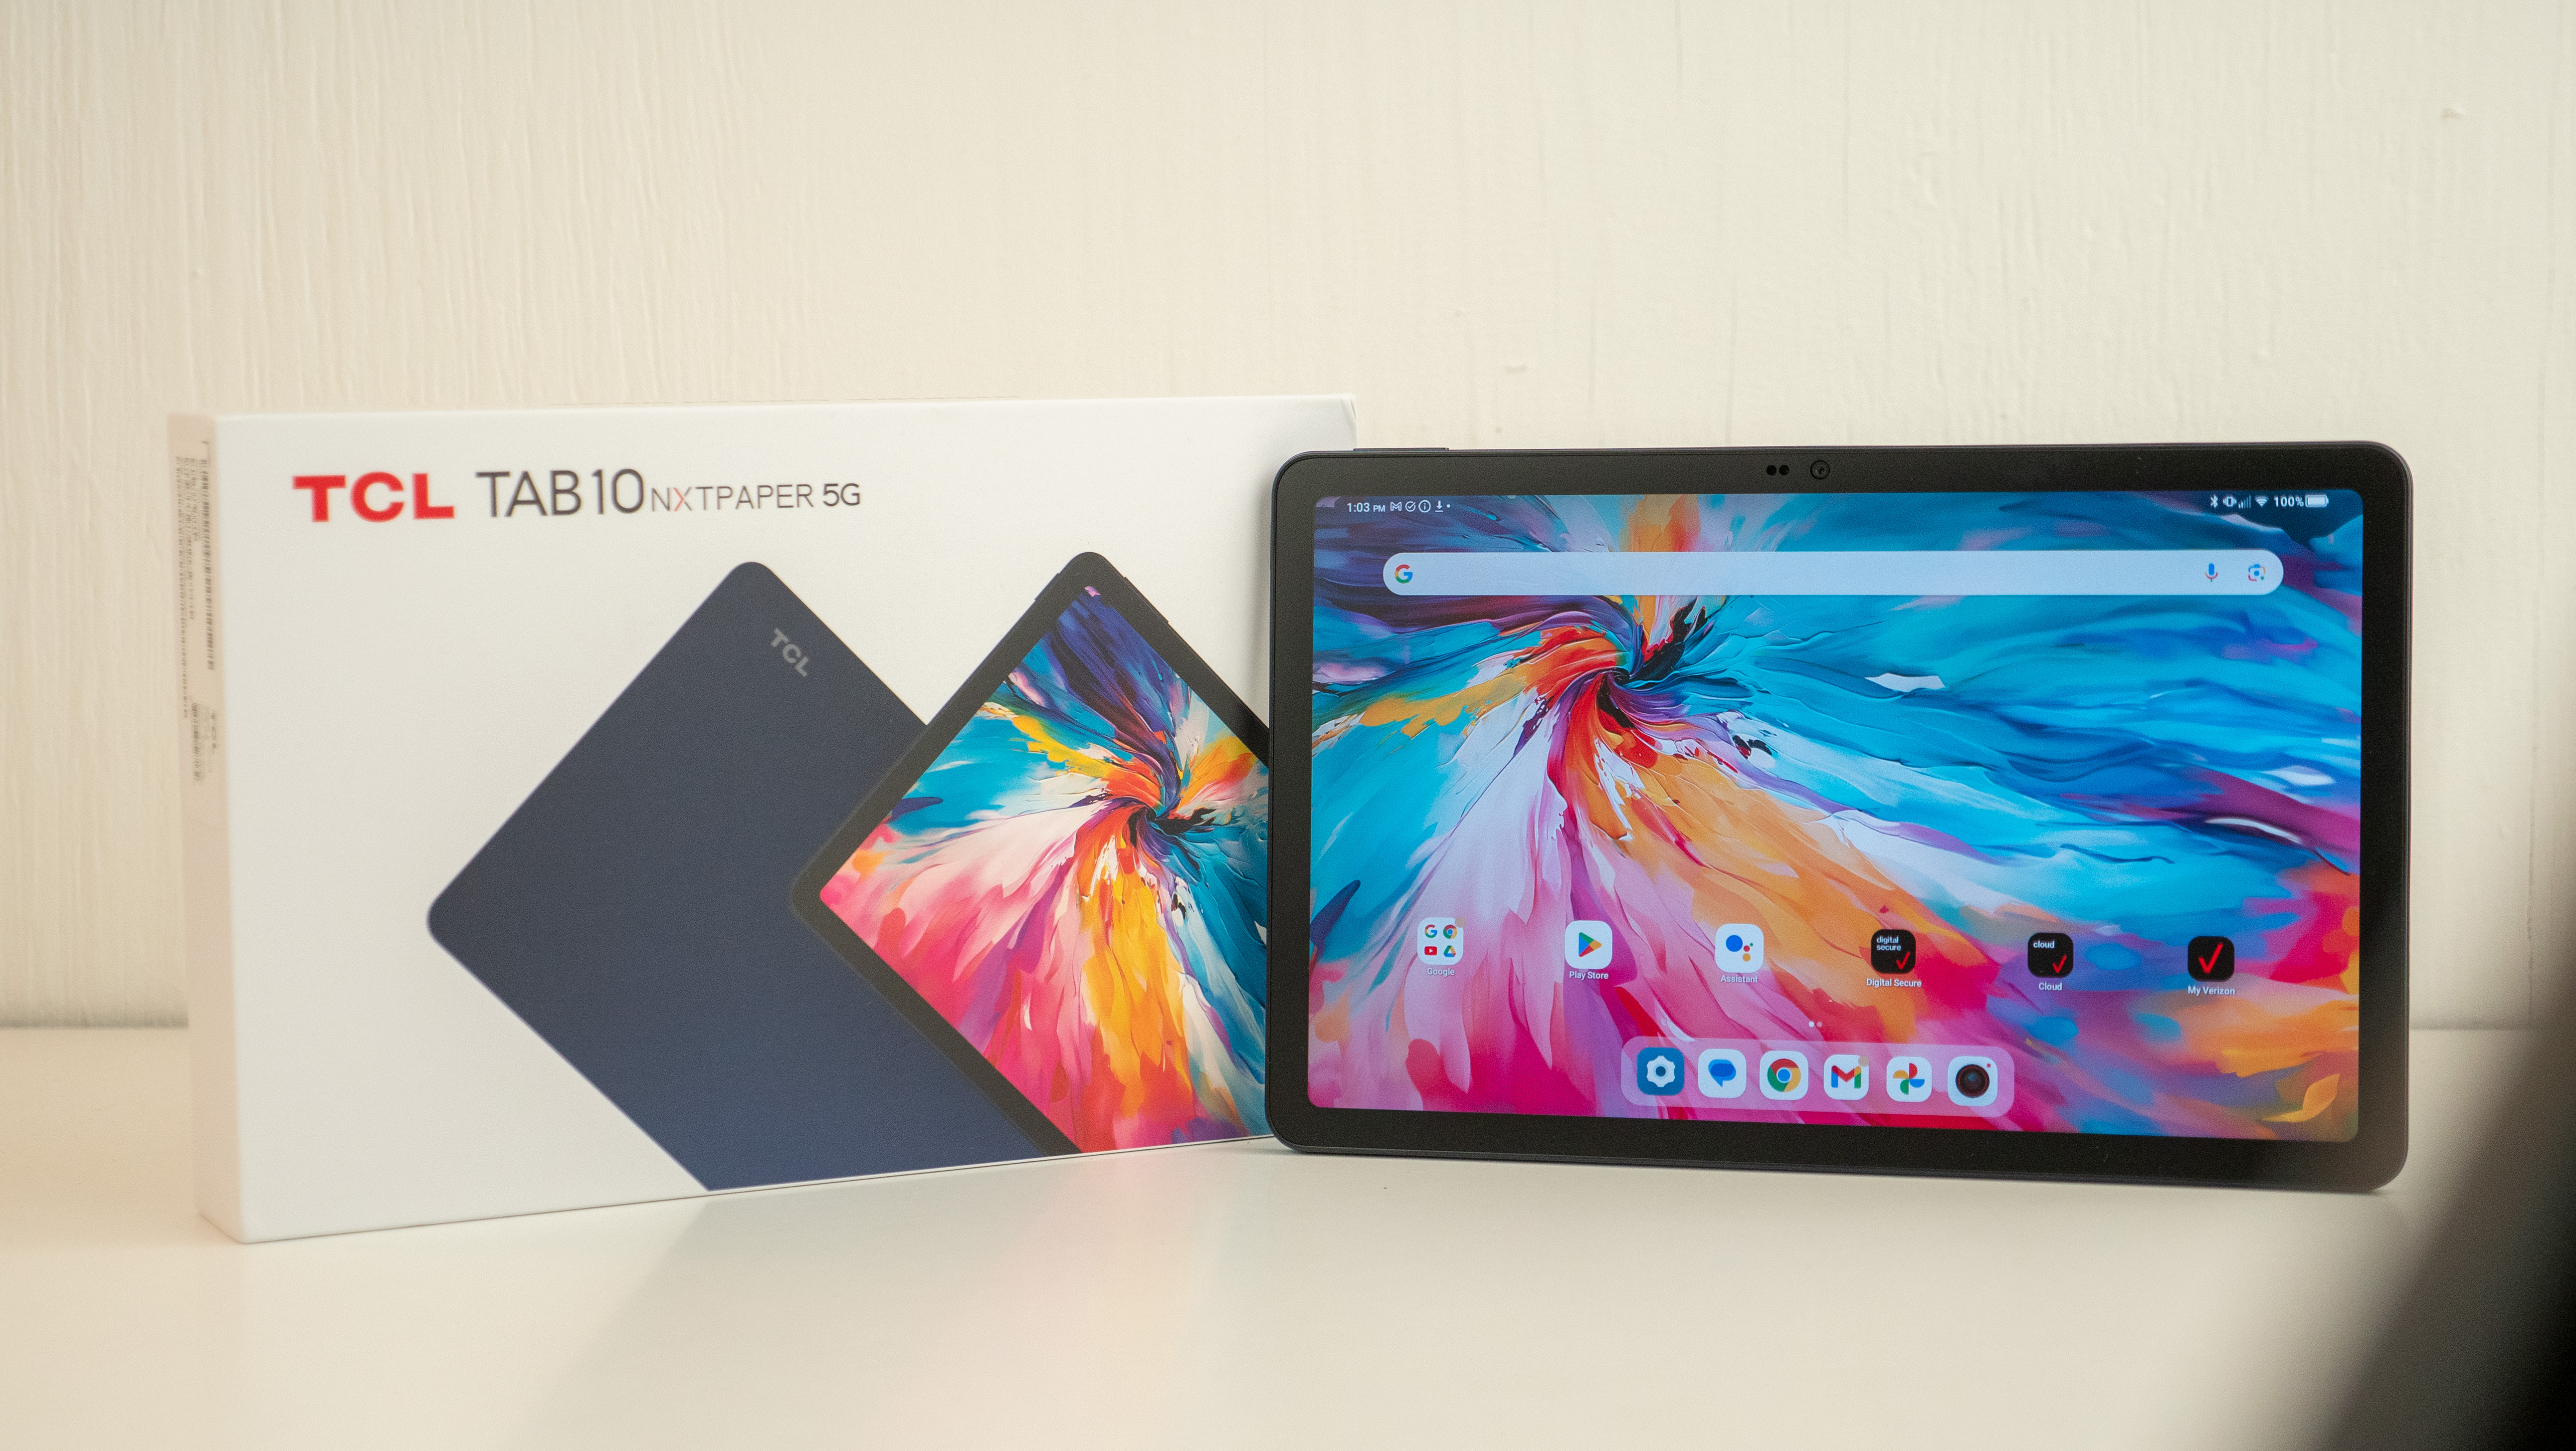 The TCL Tab 10 NXTPAPER 5G with its retail box